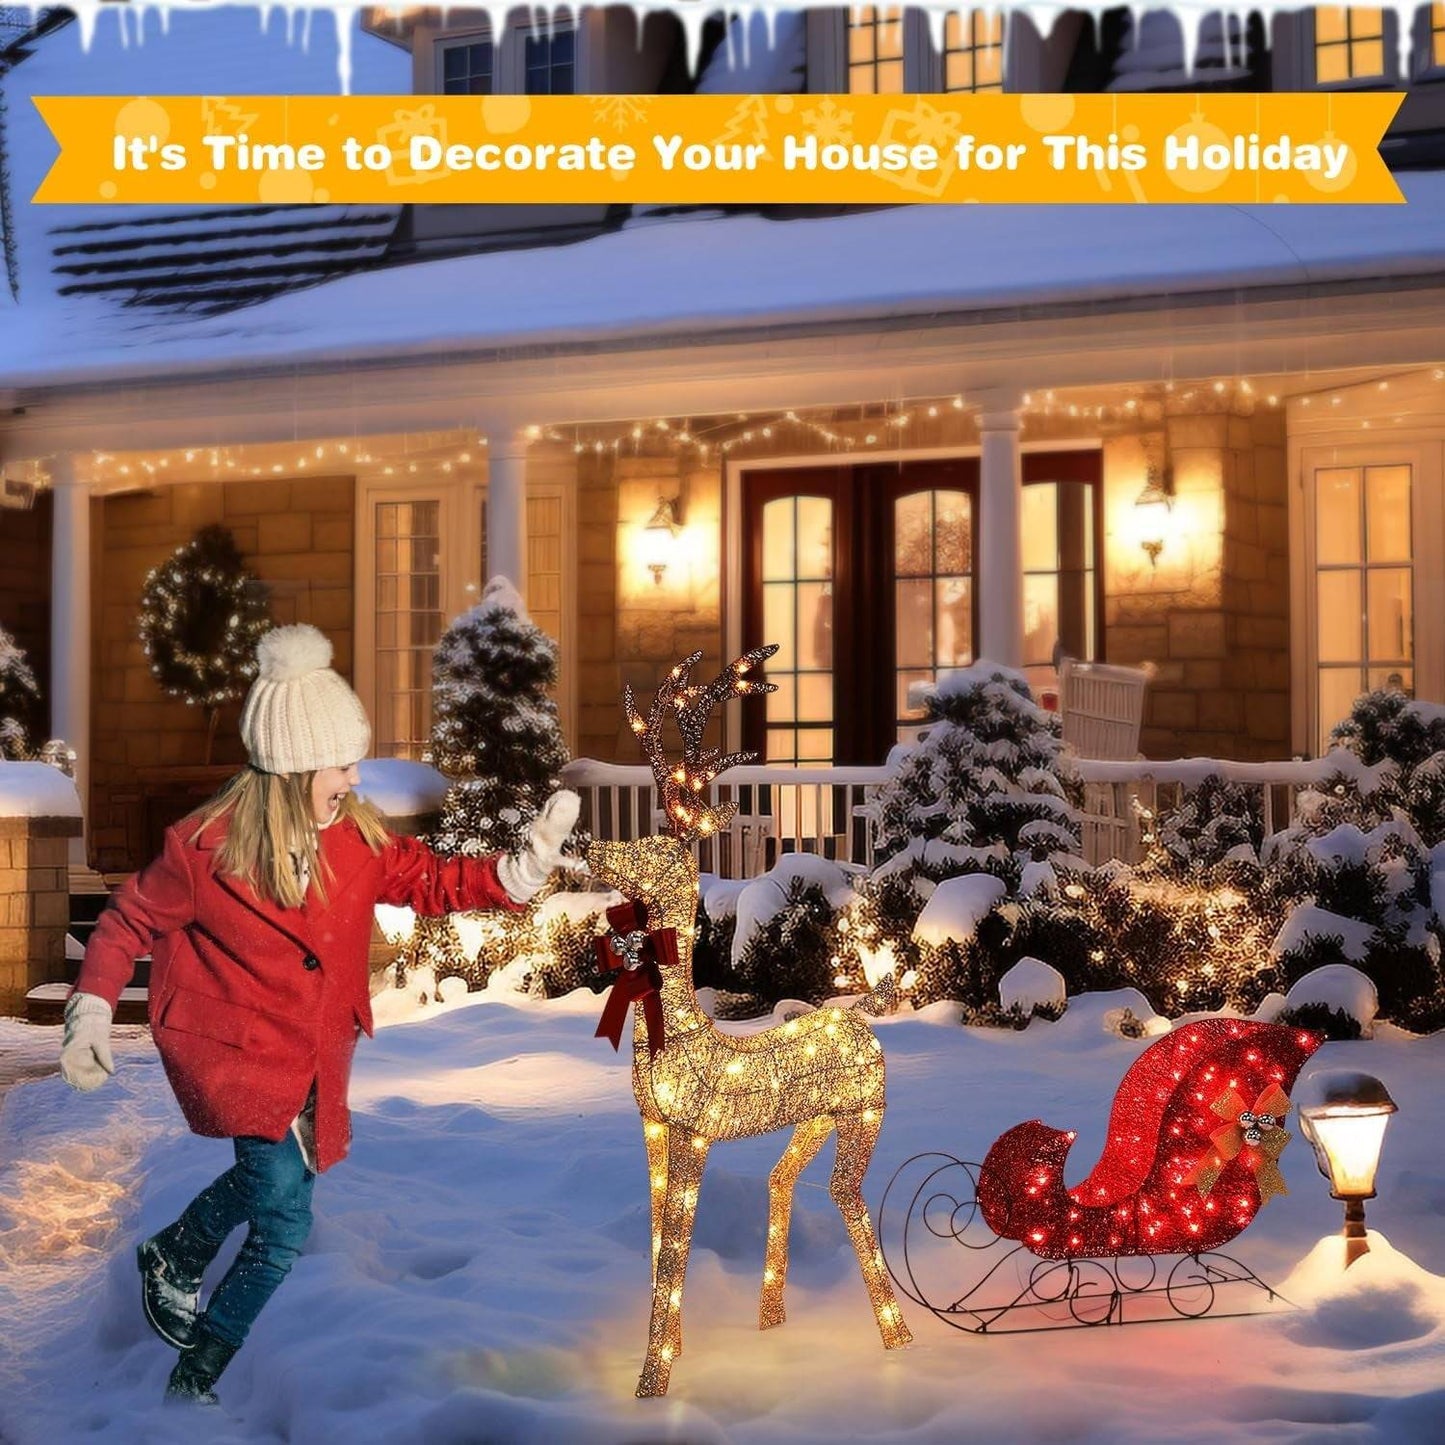 3-Piece Large Lighted Christmas Deer Family Set for Outdoor Yard Holiday Christmas Decor w/ 210 LED Lights, Stakes, Zip Ties Secured Gold